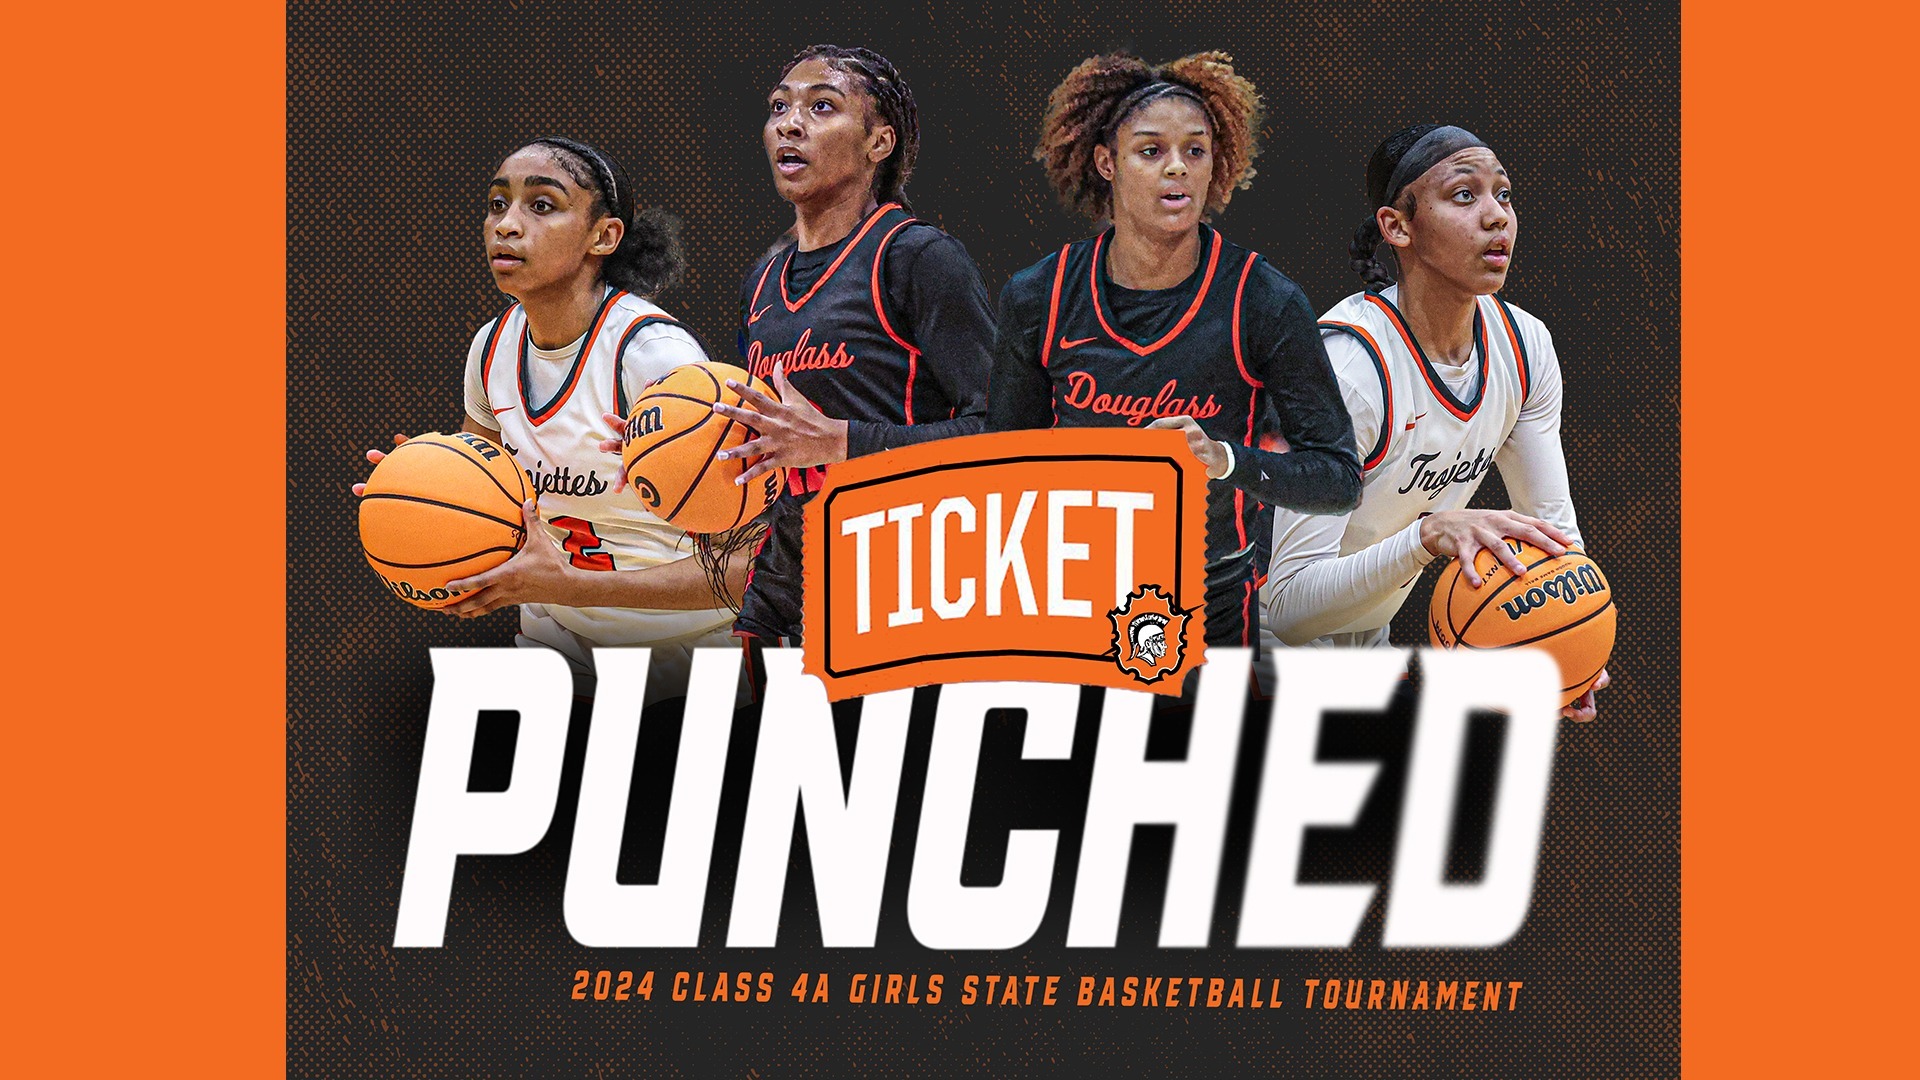 Slide 4 - Trojettes Punch Ticket to 2024 Class 4A Girls State Tournament